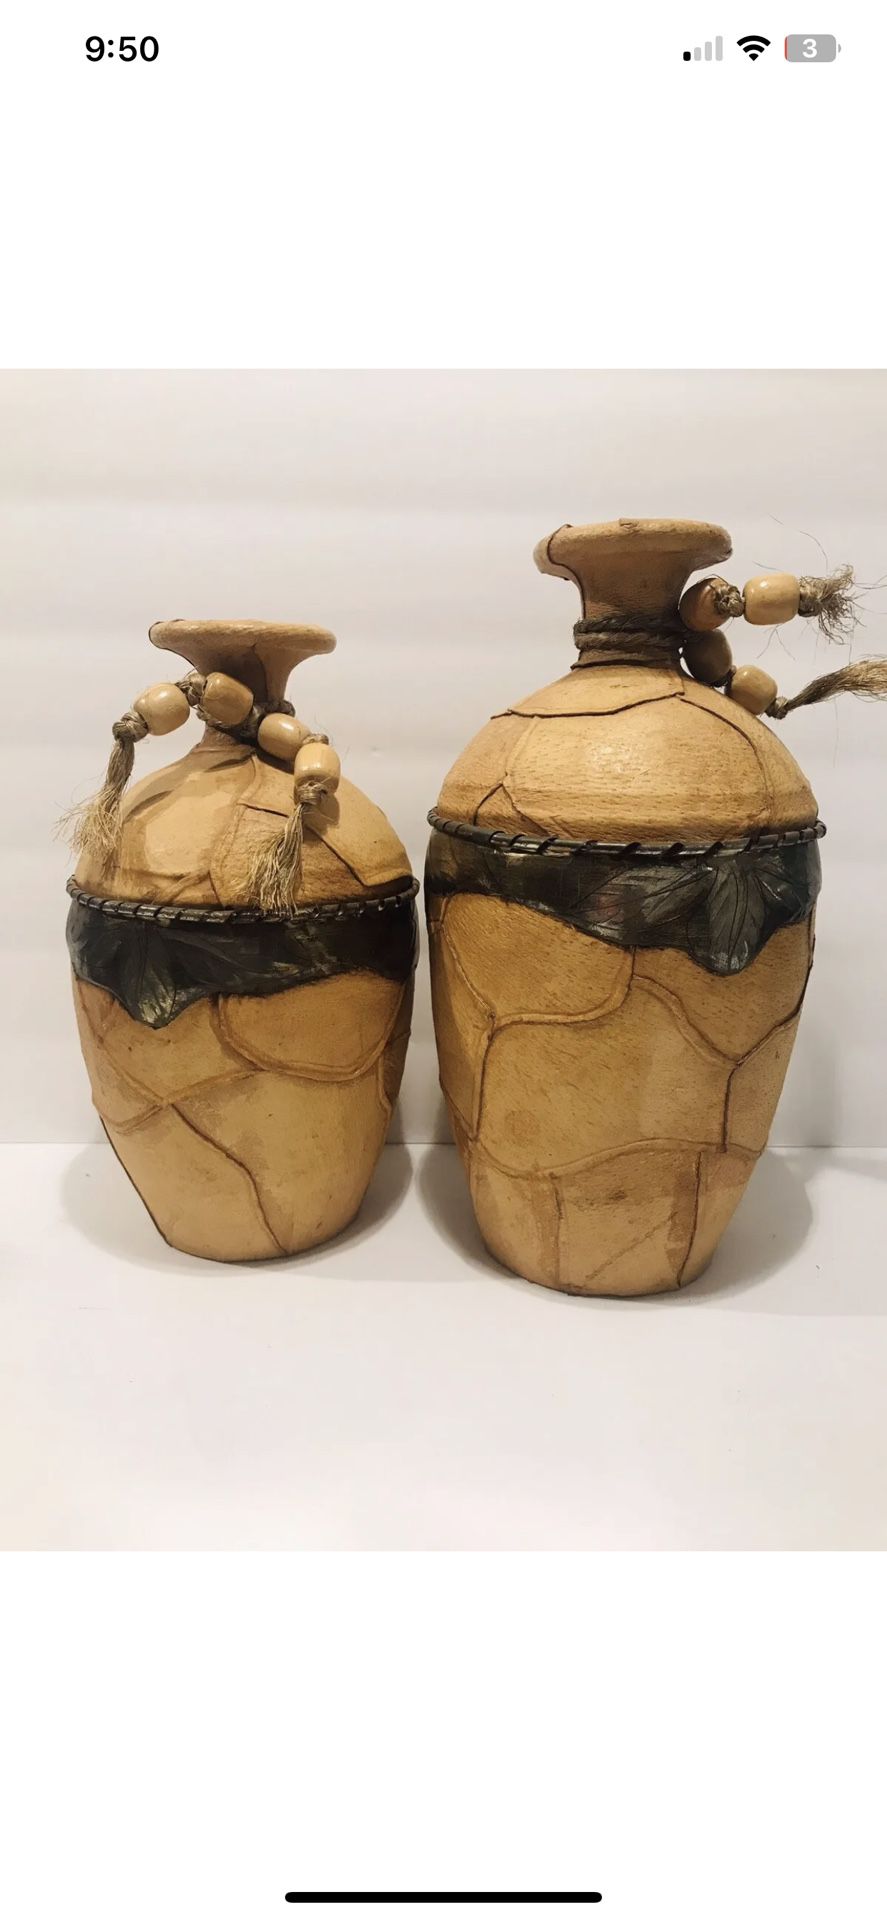 Set Of Two Vintage Leather Wrapped Vases Vintage Farmhouse Rustic Vases 11”,9”.  Beautiful and stunning pair of rustic vases, leather wrapped with met